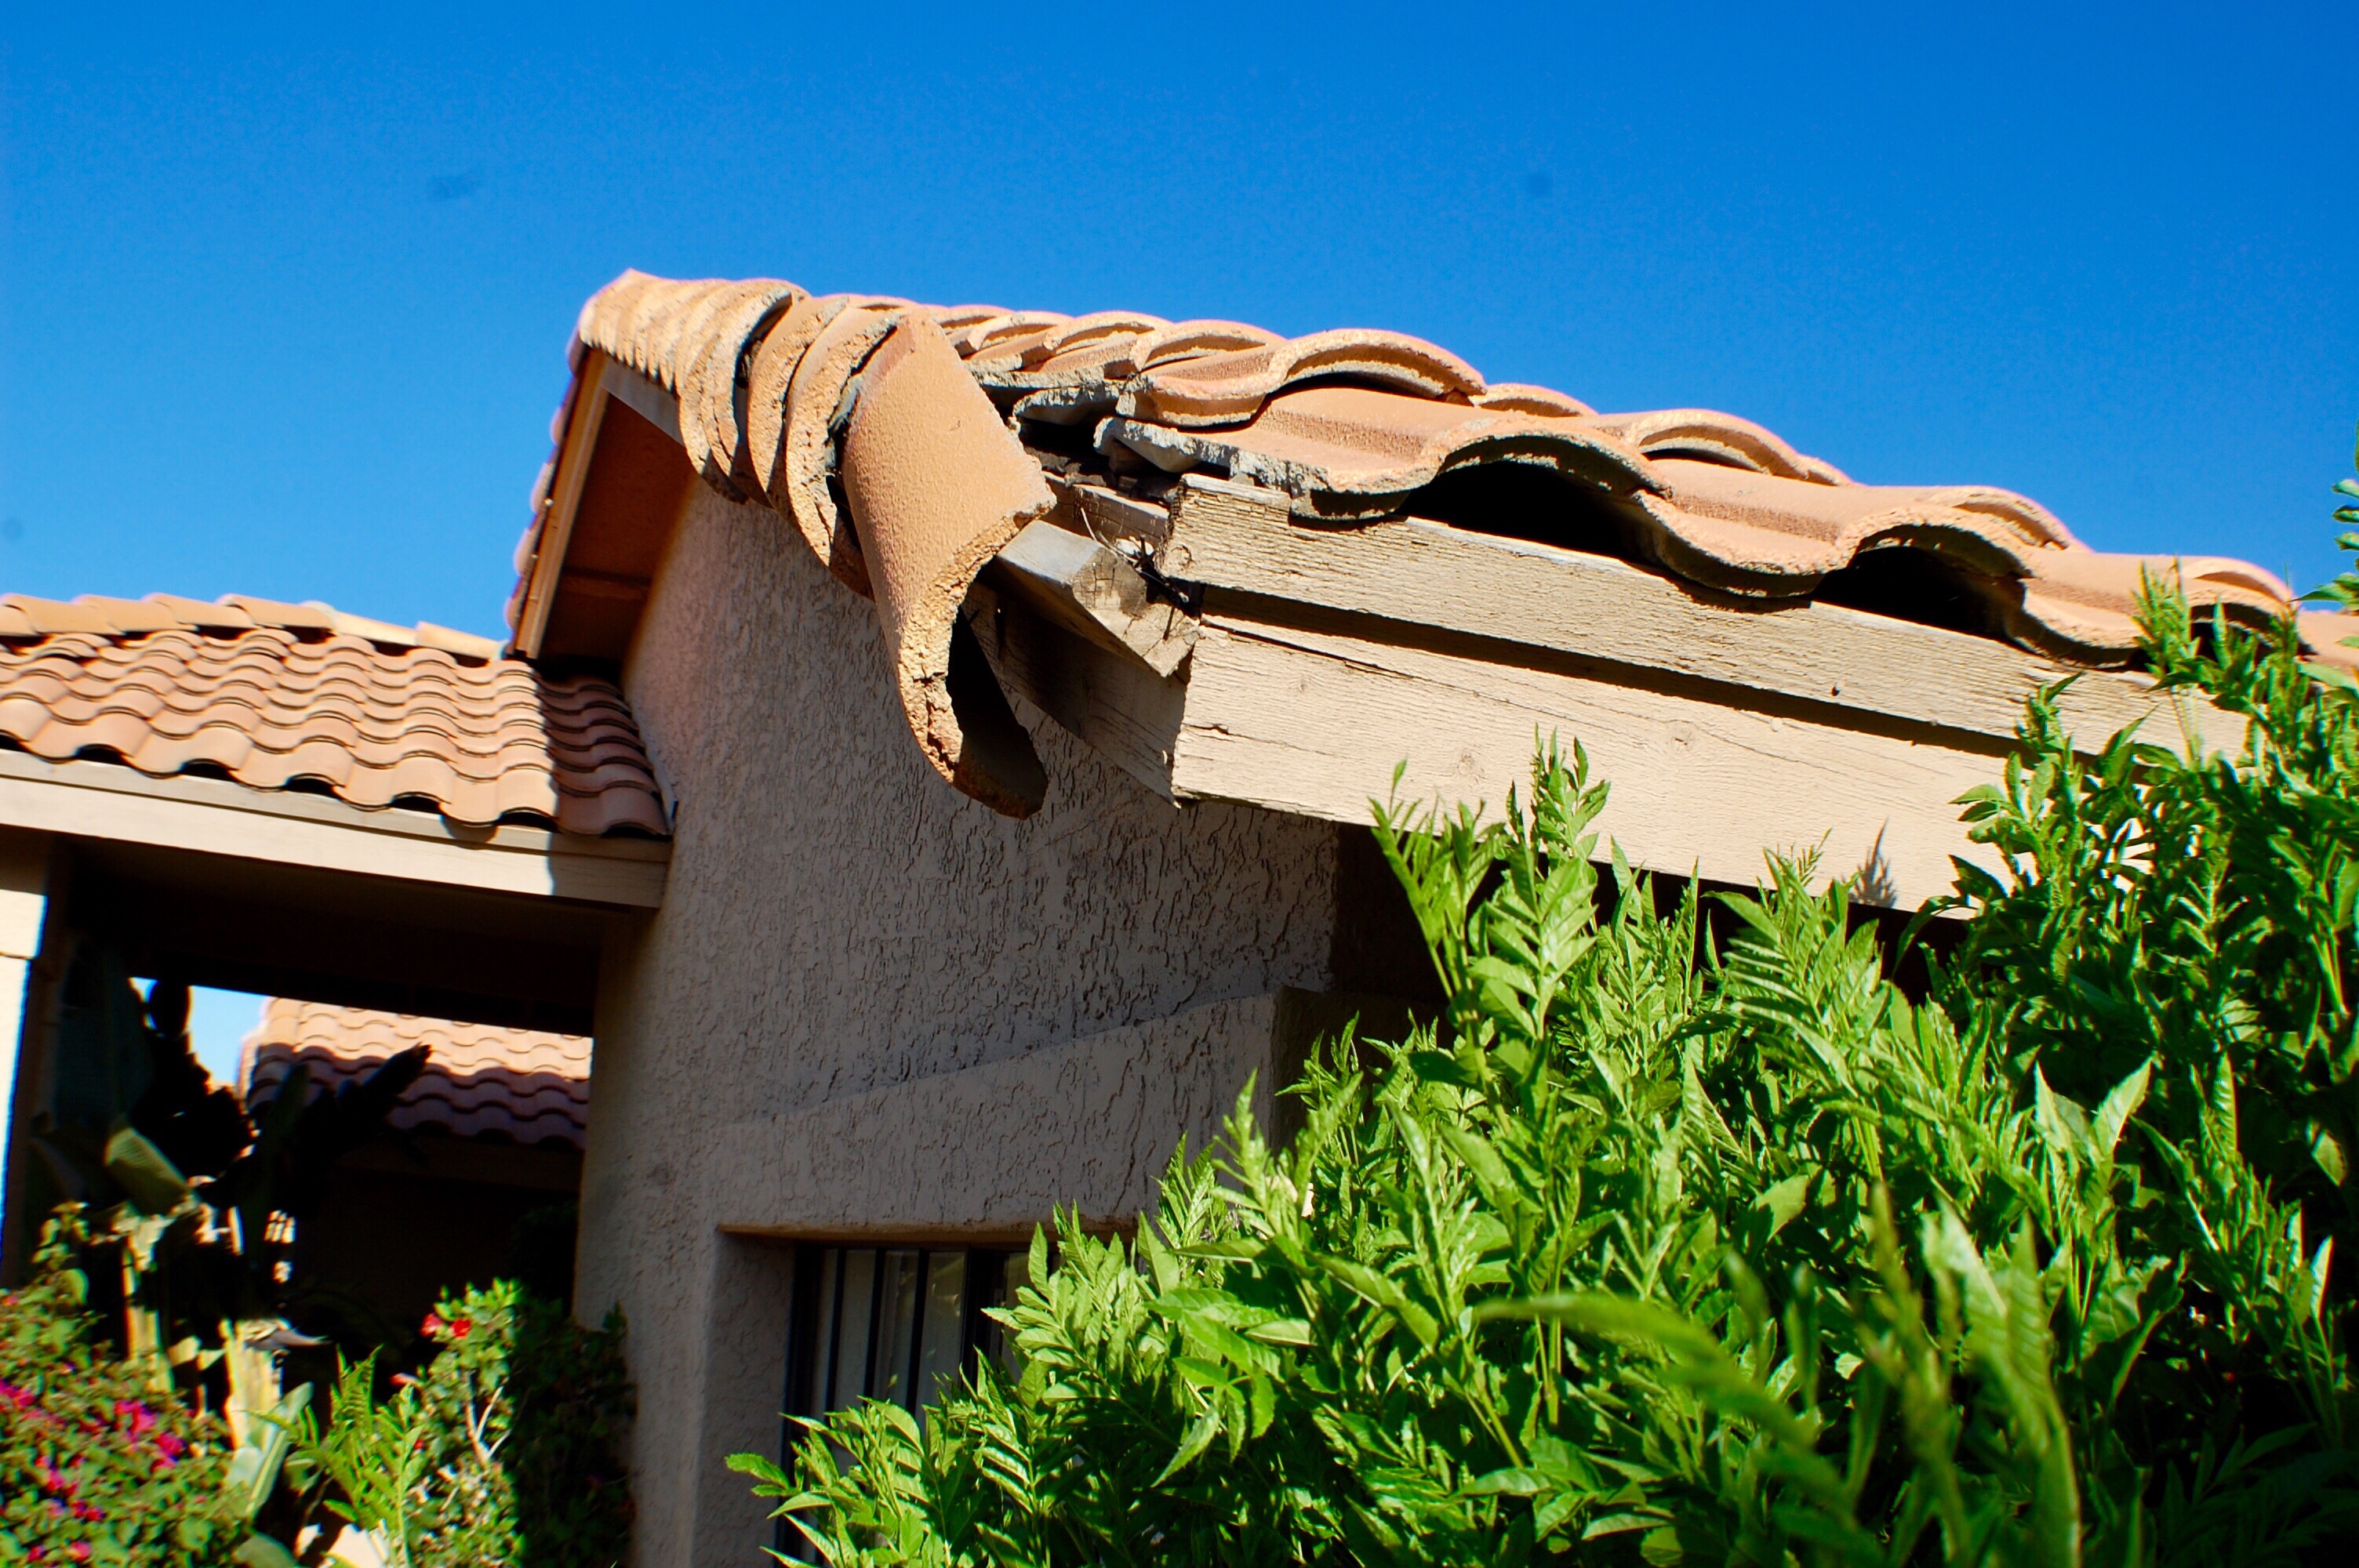 Broken Roof Tiles requiring a Roof Inspection in Maryland